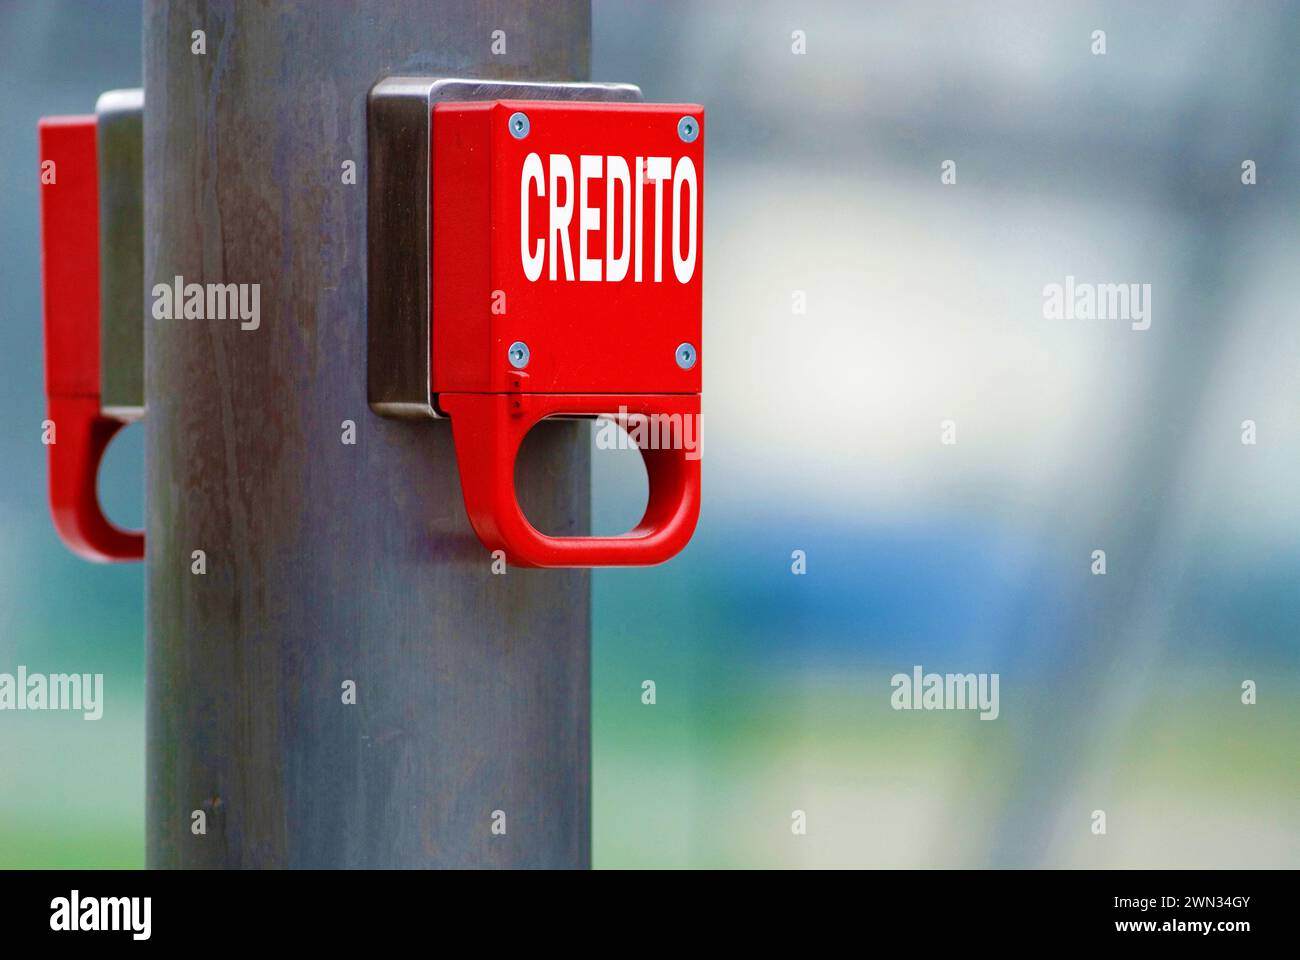 emergency brake with the spanish and italian word Credito for Credit, debt, ceiling, mountain, pile, reduction, burden Stock Photo